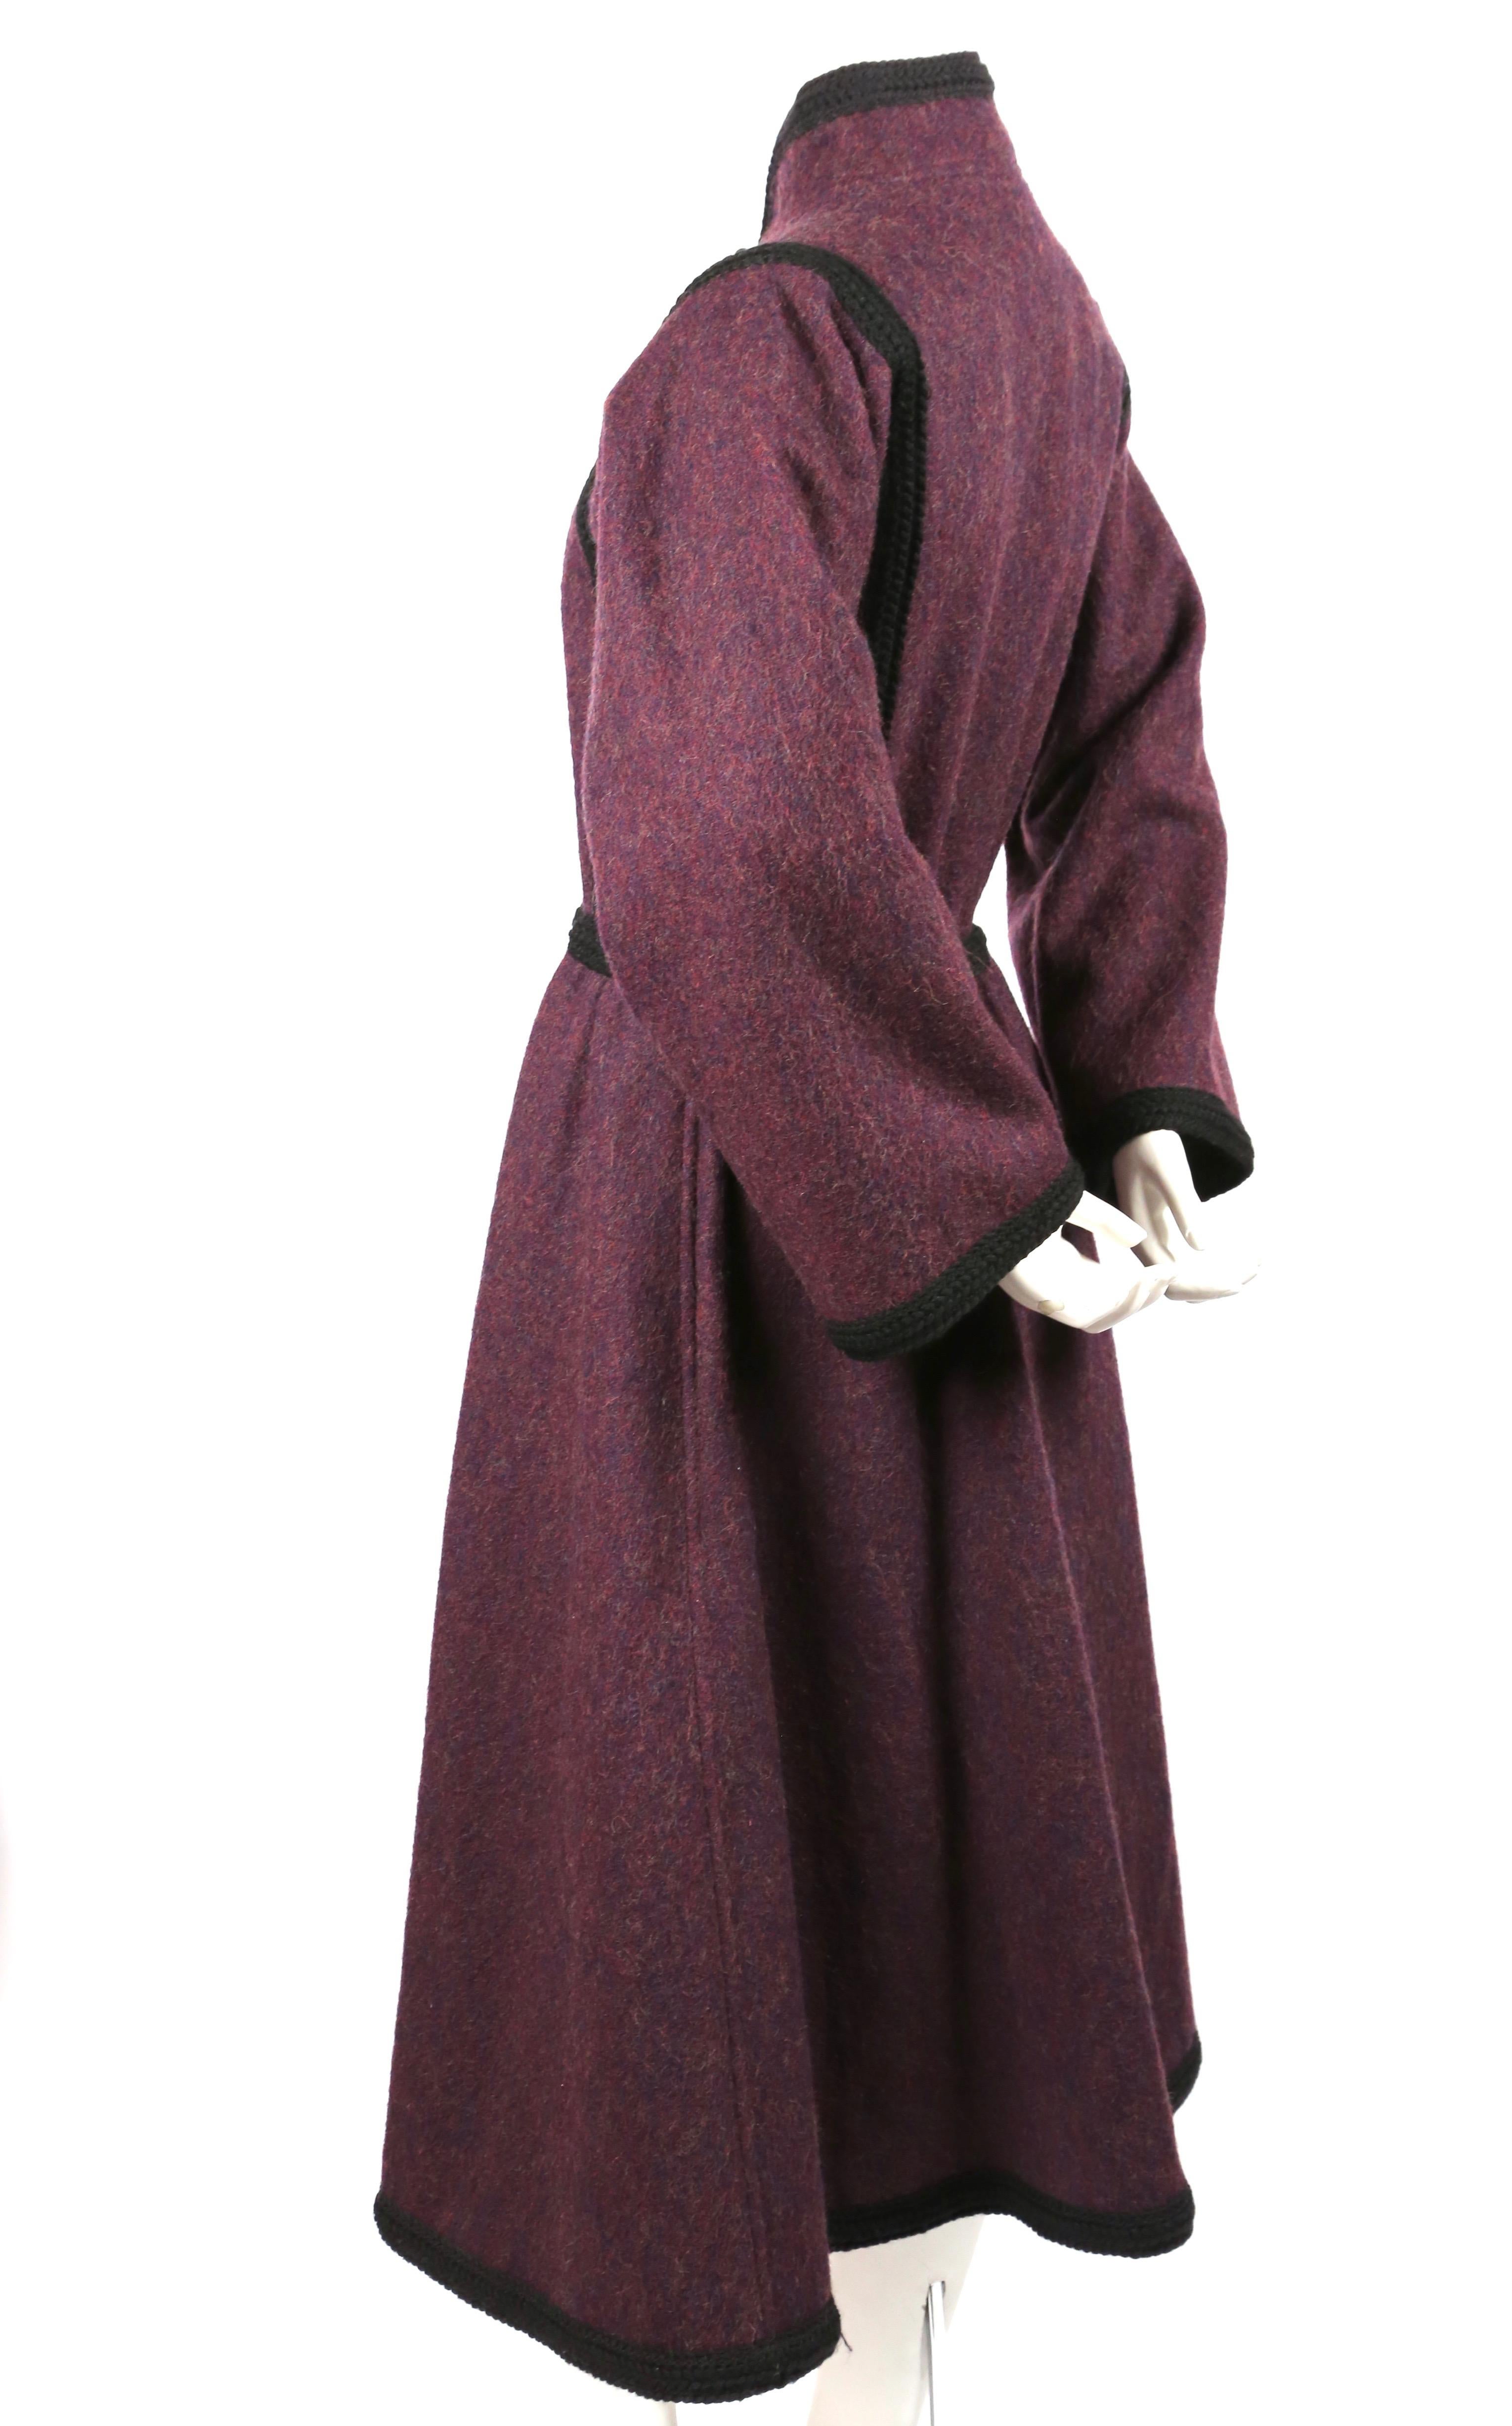 Very rare purple wool coat with fitted bodice, full sleeves, toggle closure and braided trim by Yves Saint Laurent dating to fall of 1976 from the well documented 'Russian Collection'. Labeled a French size 38. Approximate measurements: shoulder